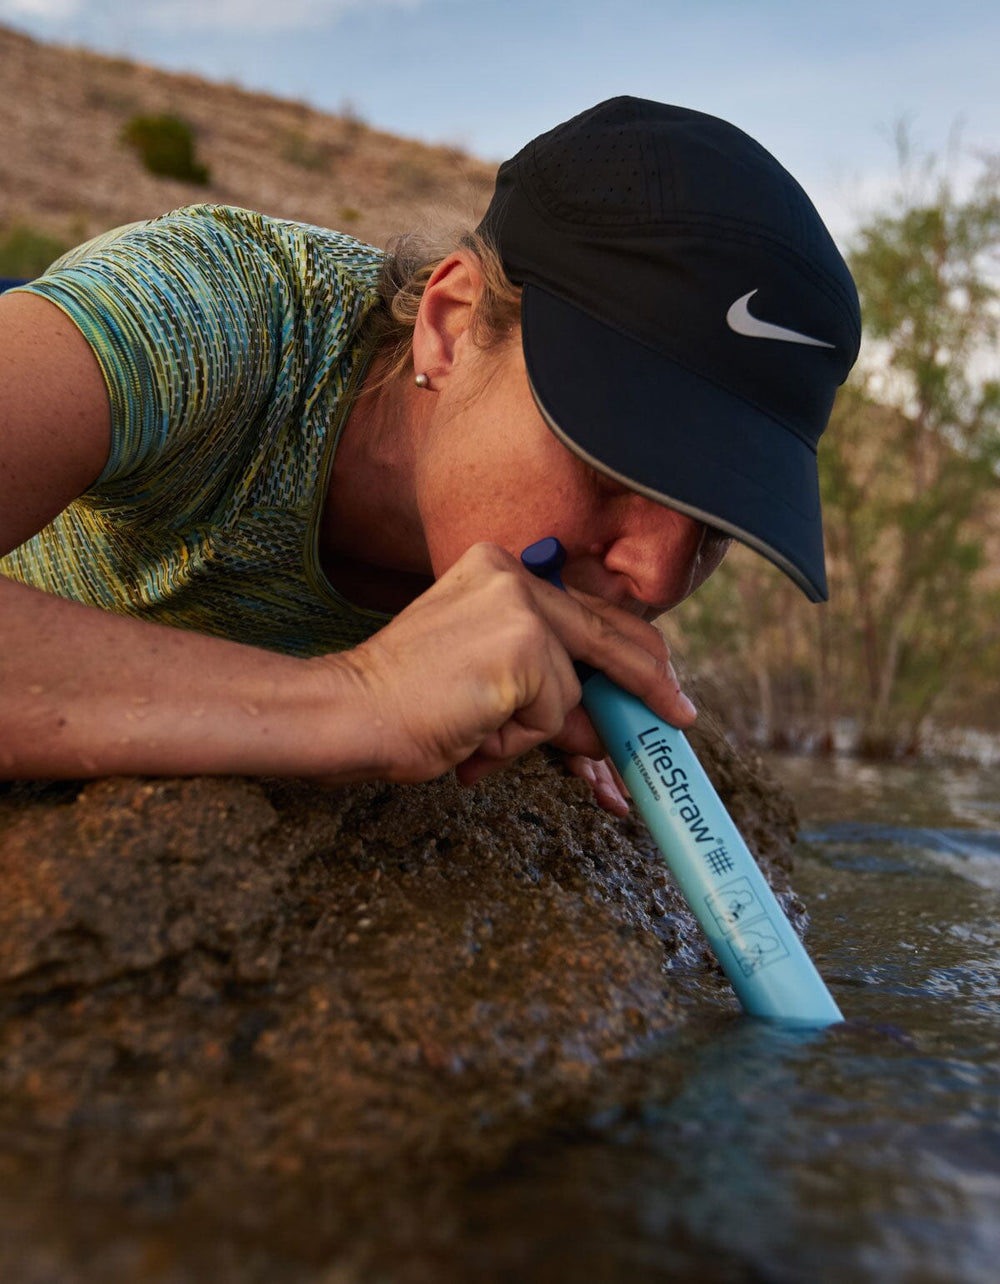 LifeStraw Personal Water Filter - Blue